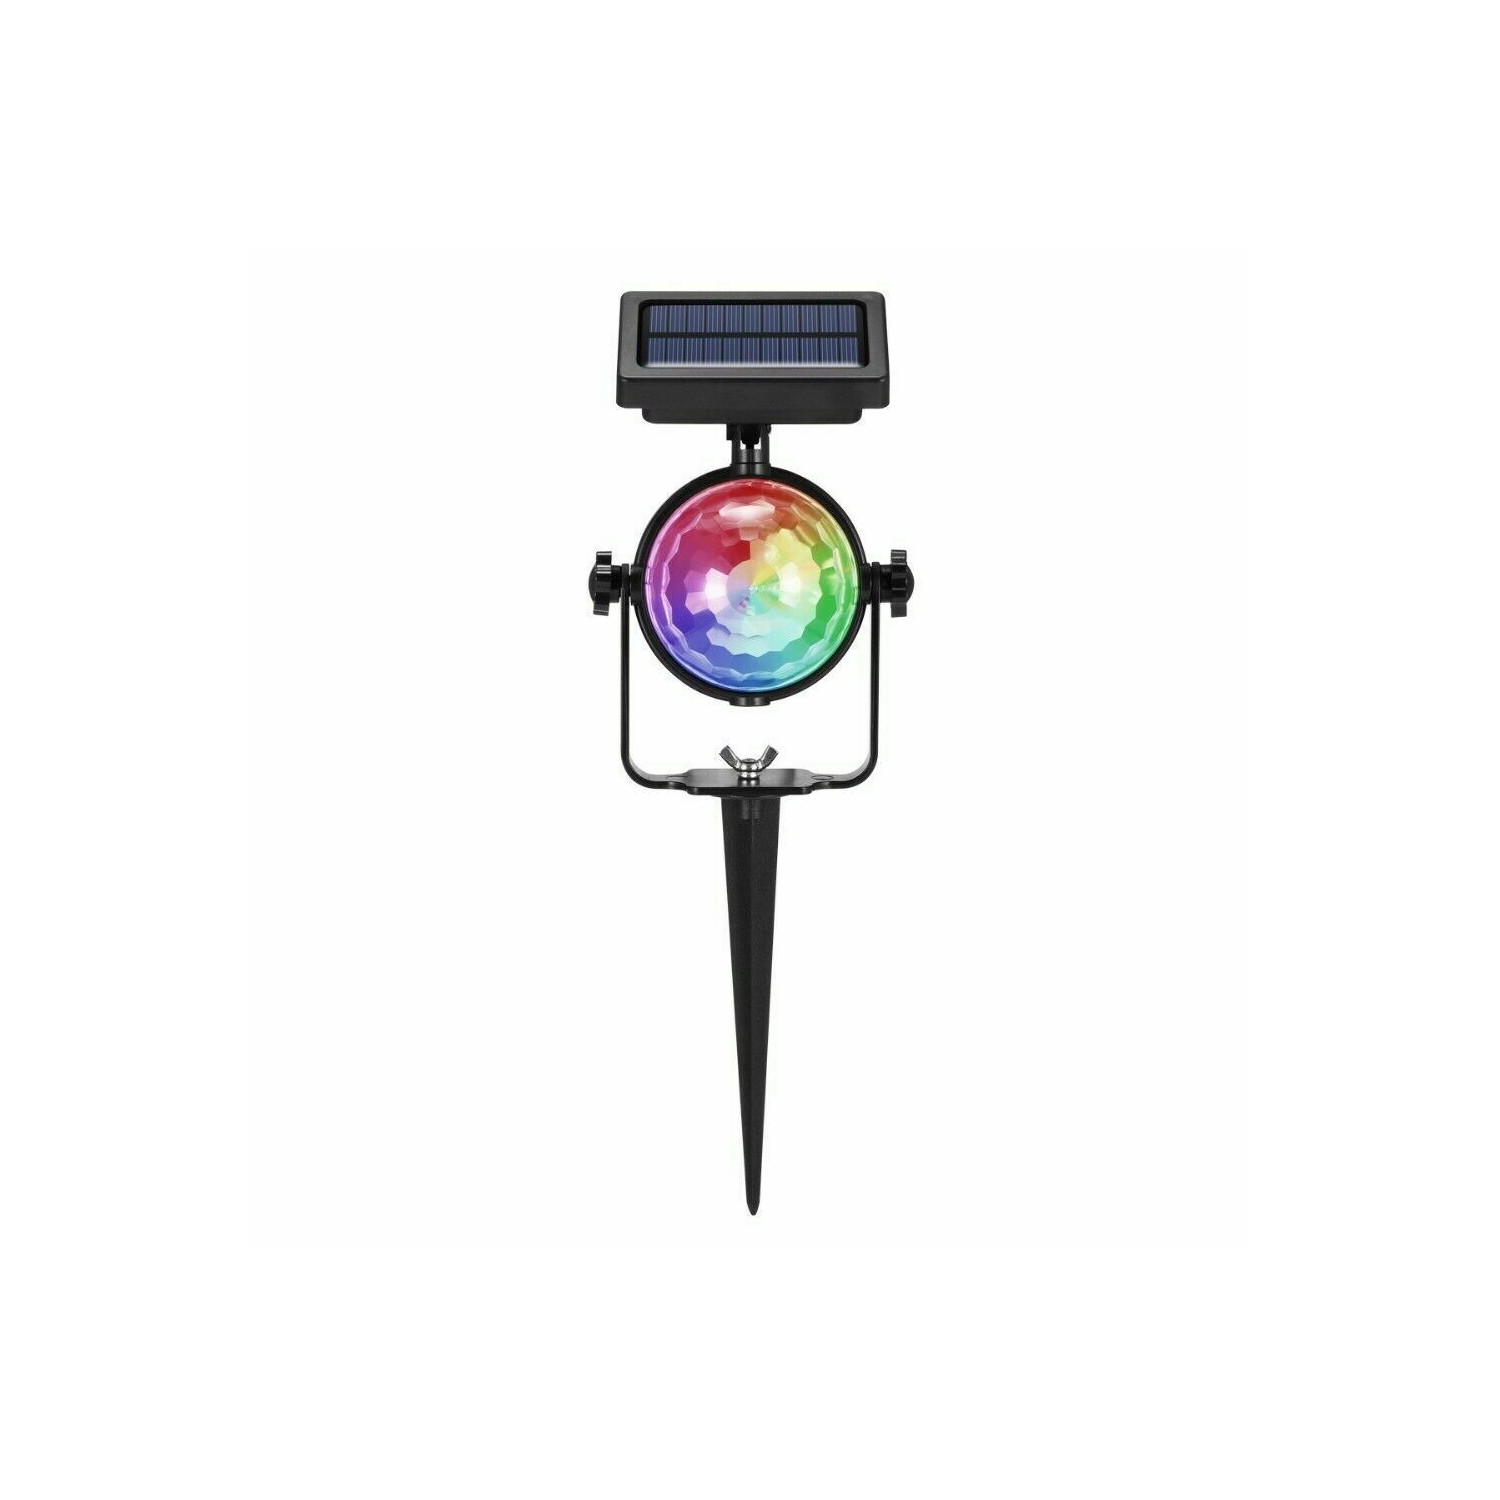 ISTAR Solar Projector Lights Outdoor, Rotating Multicolor Disco Stage Lamp RGB Color Changing LED Projection Lamp Waterproof IP65 for Outdoor Garden Pathway Christmas Party